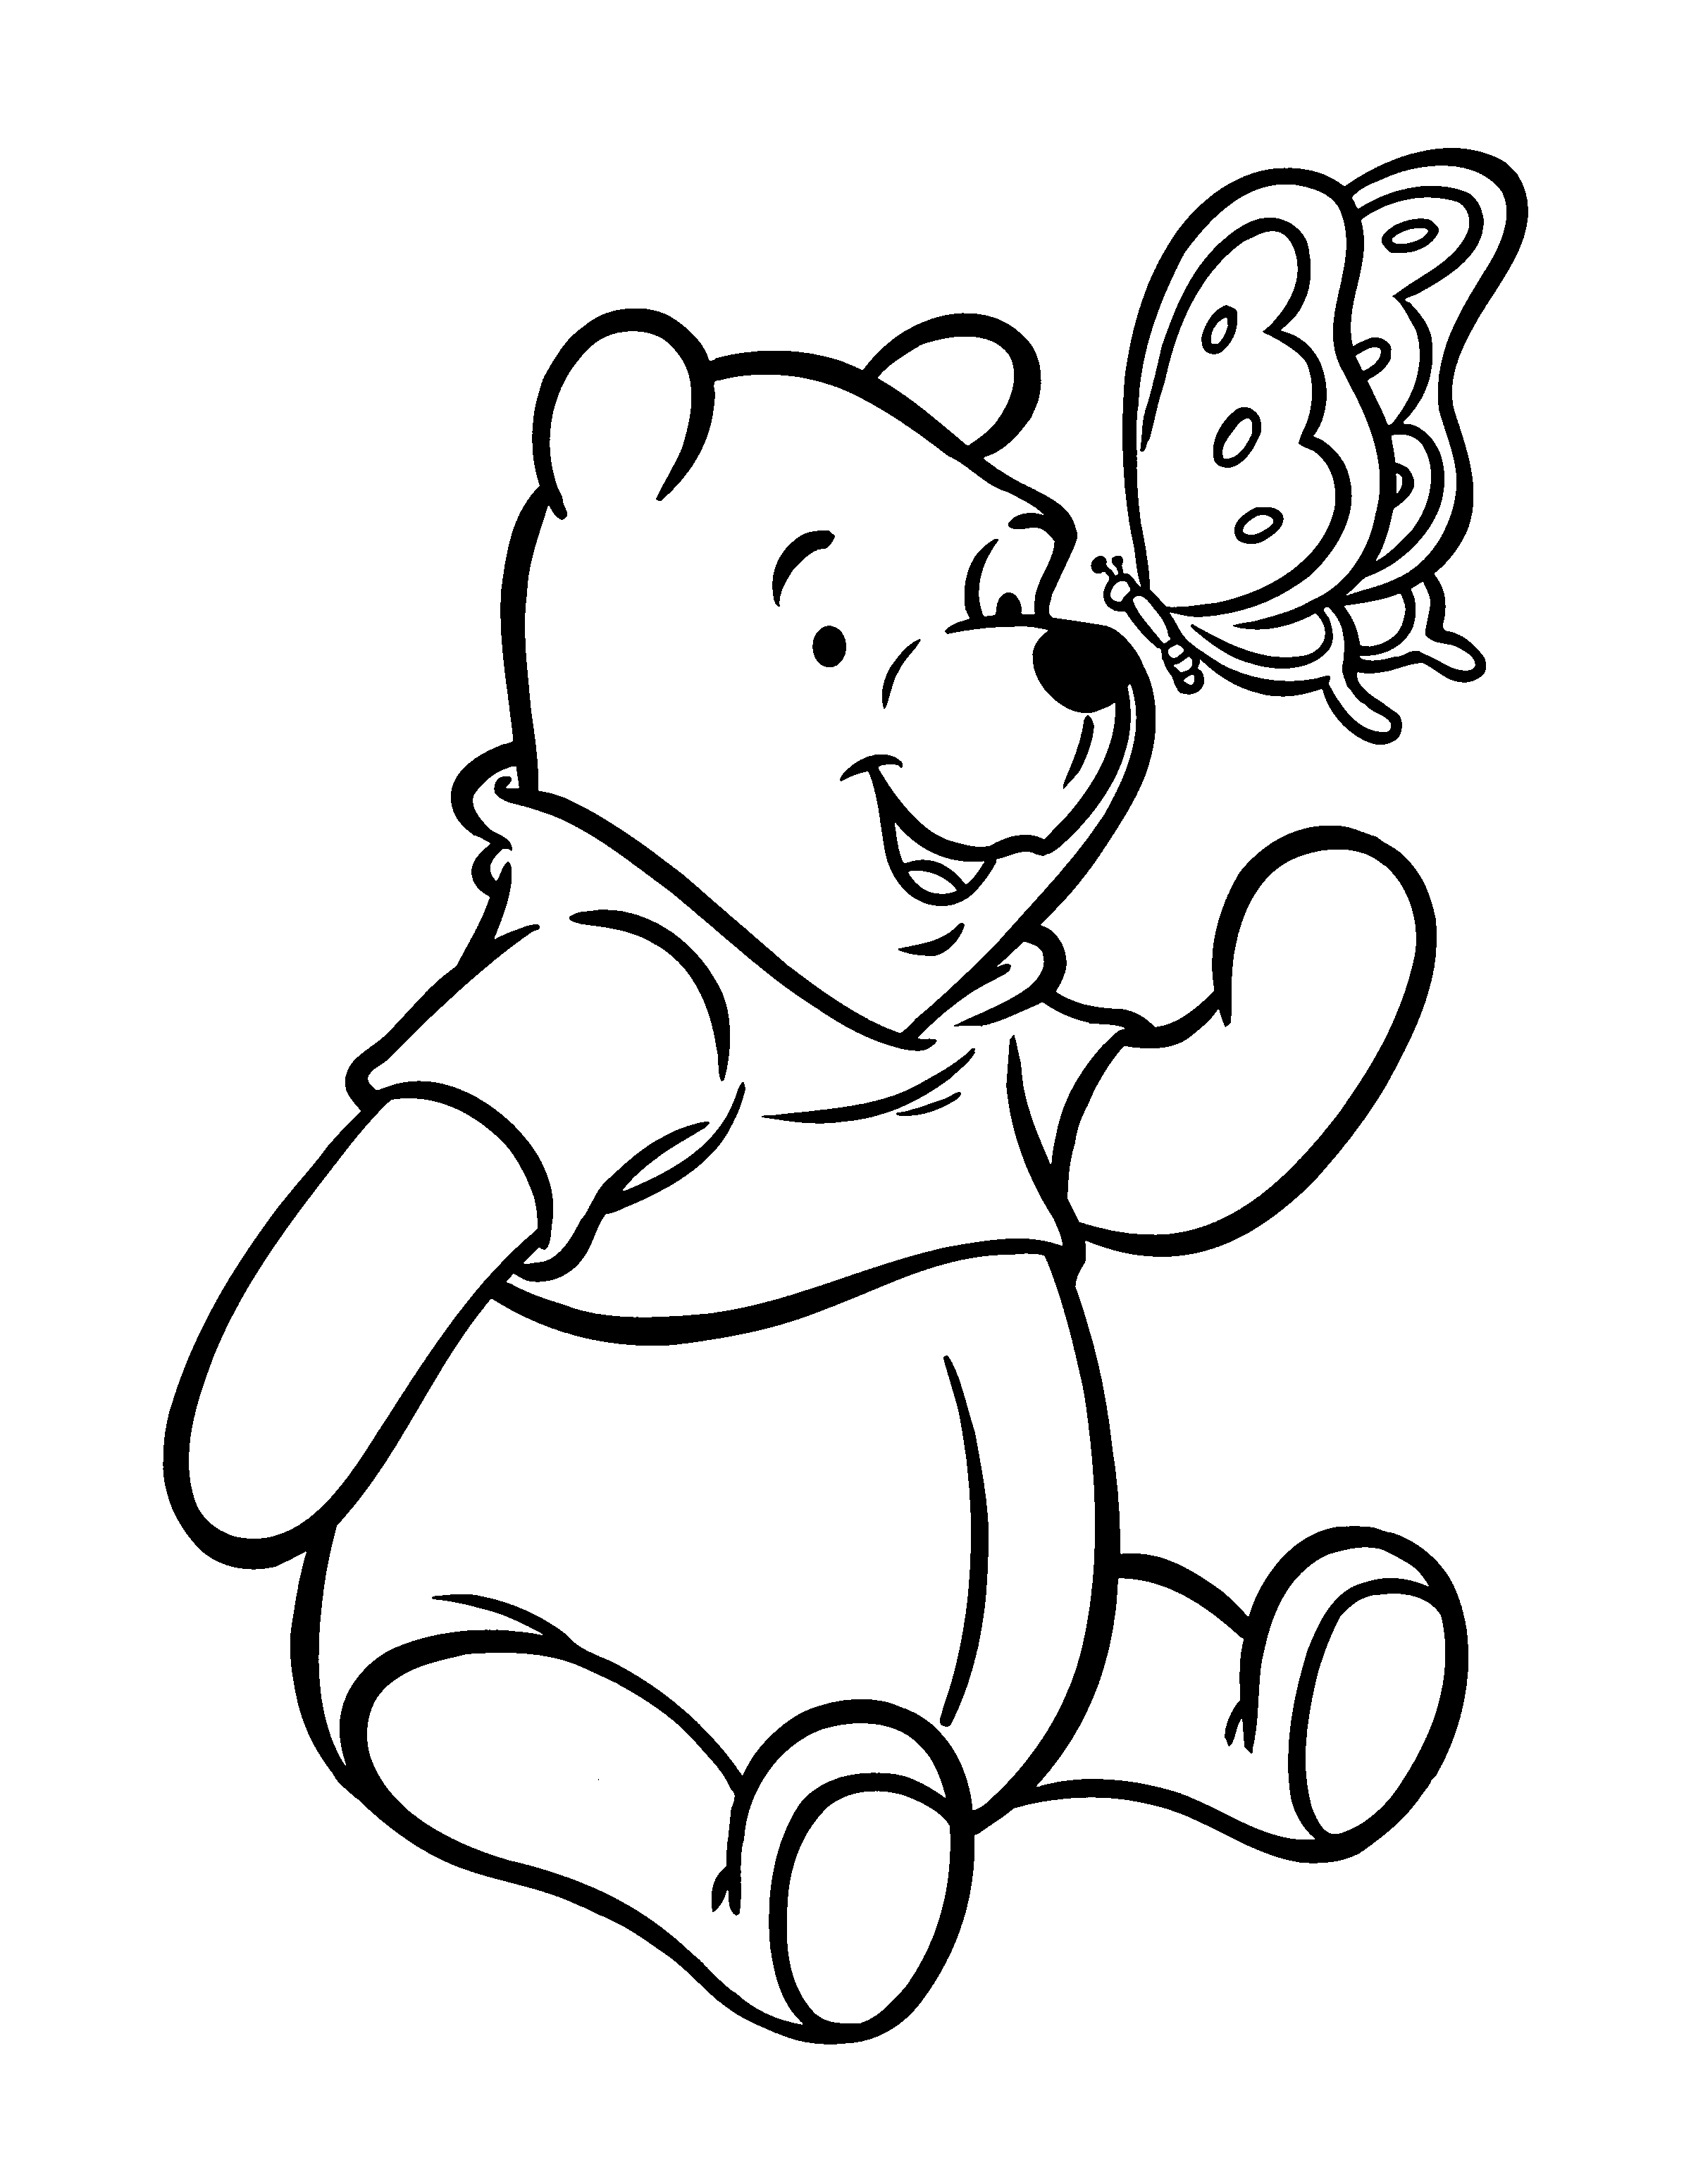 Winnie The Pooh Printable Coloring Pages #2592 | Silvana Coloring ...